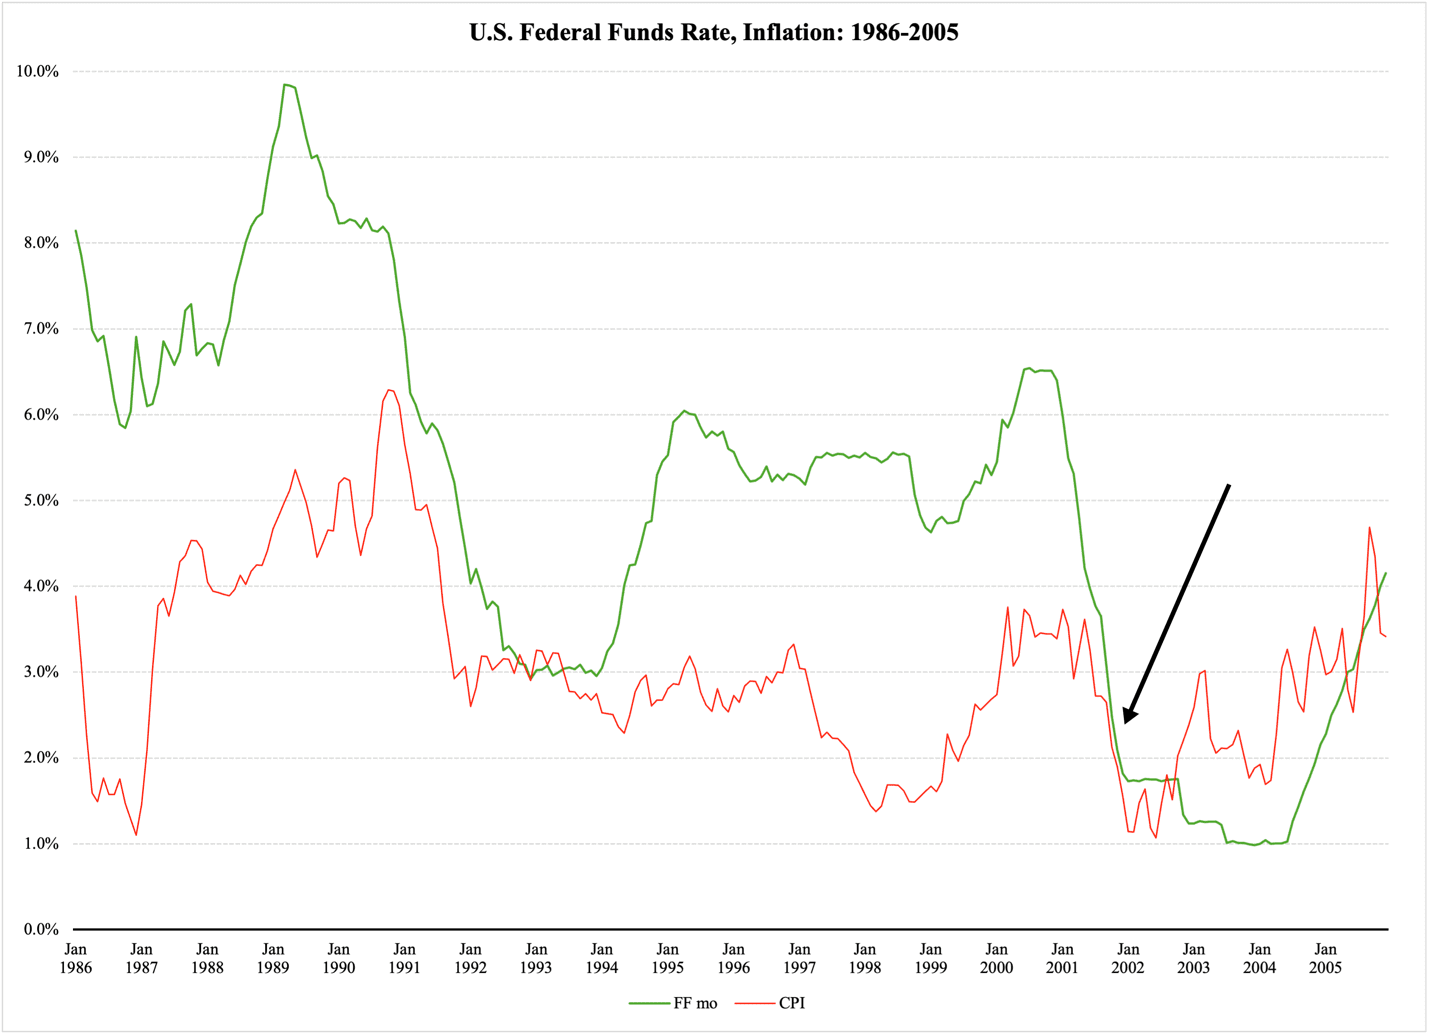 A graph showing the growth of the us federal funds rate

Description automatically generated